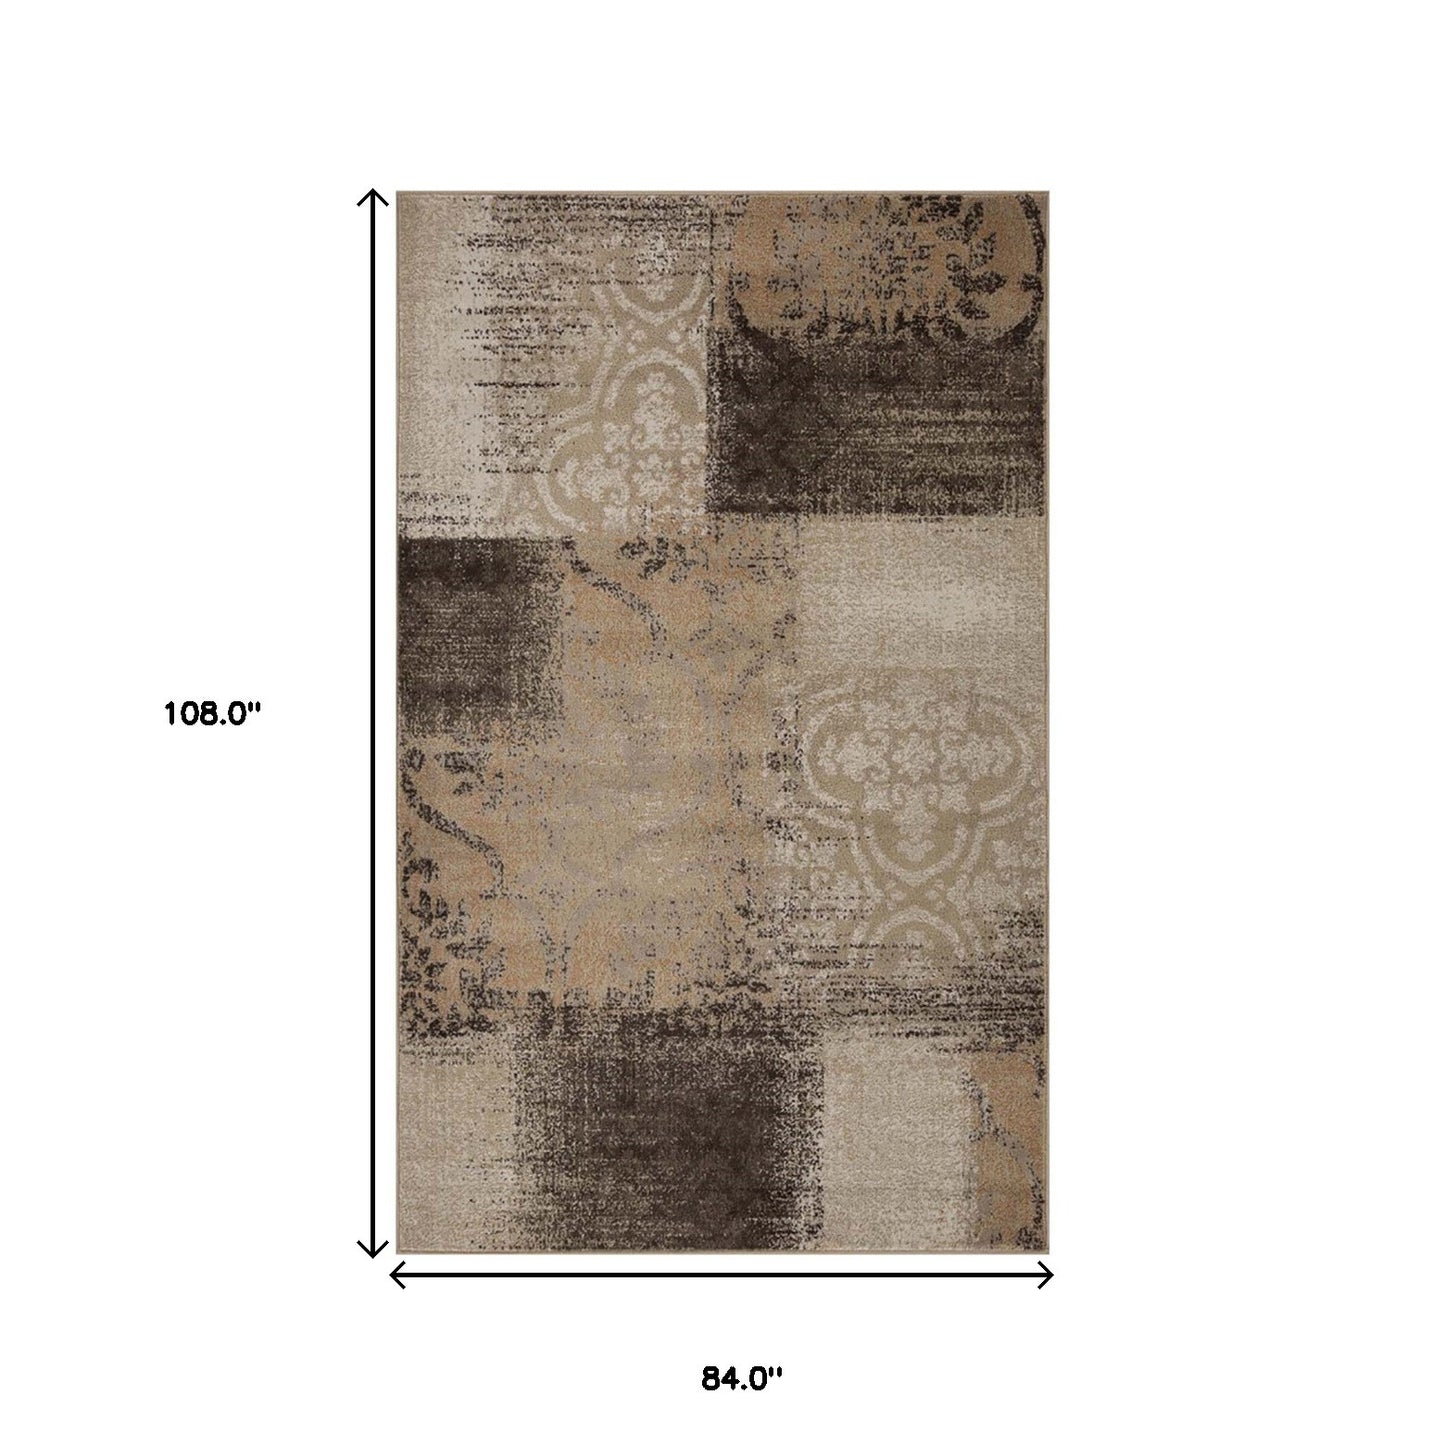 7' X 9' Beige Gray And Black Damask Distressed Stain Resistant Area Rug